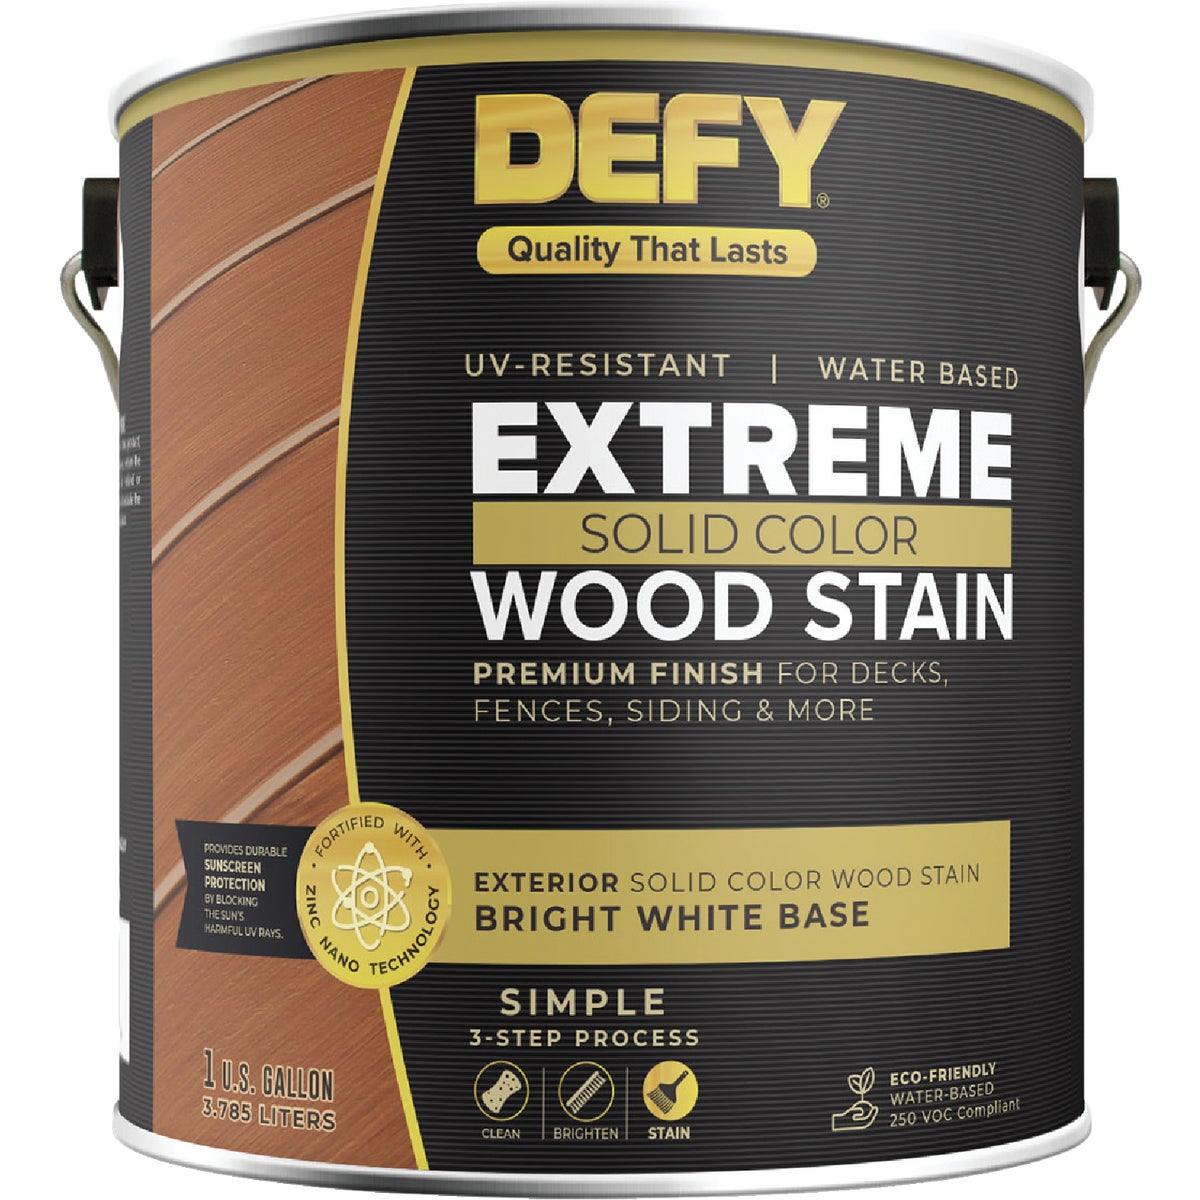 Item 782220, Defy Extreme Solid Color Wood Stain is an extremely durable synthetic-resin